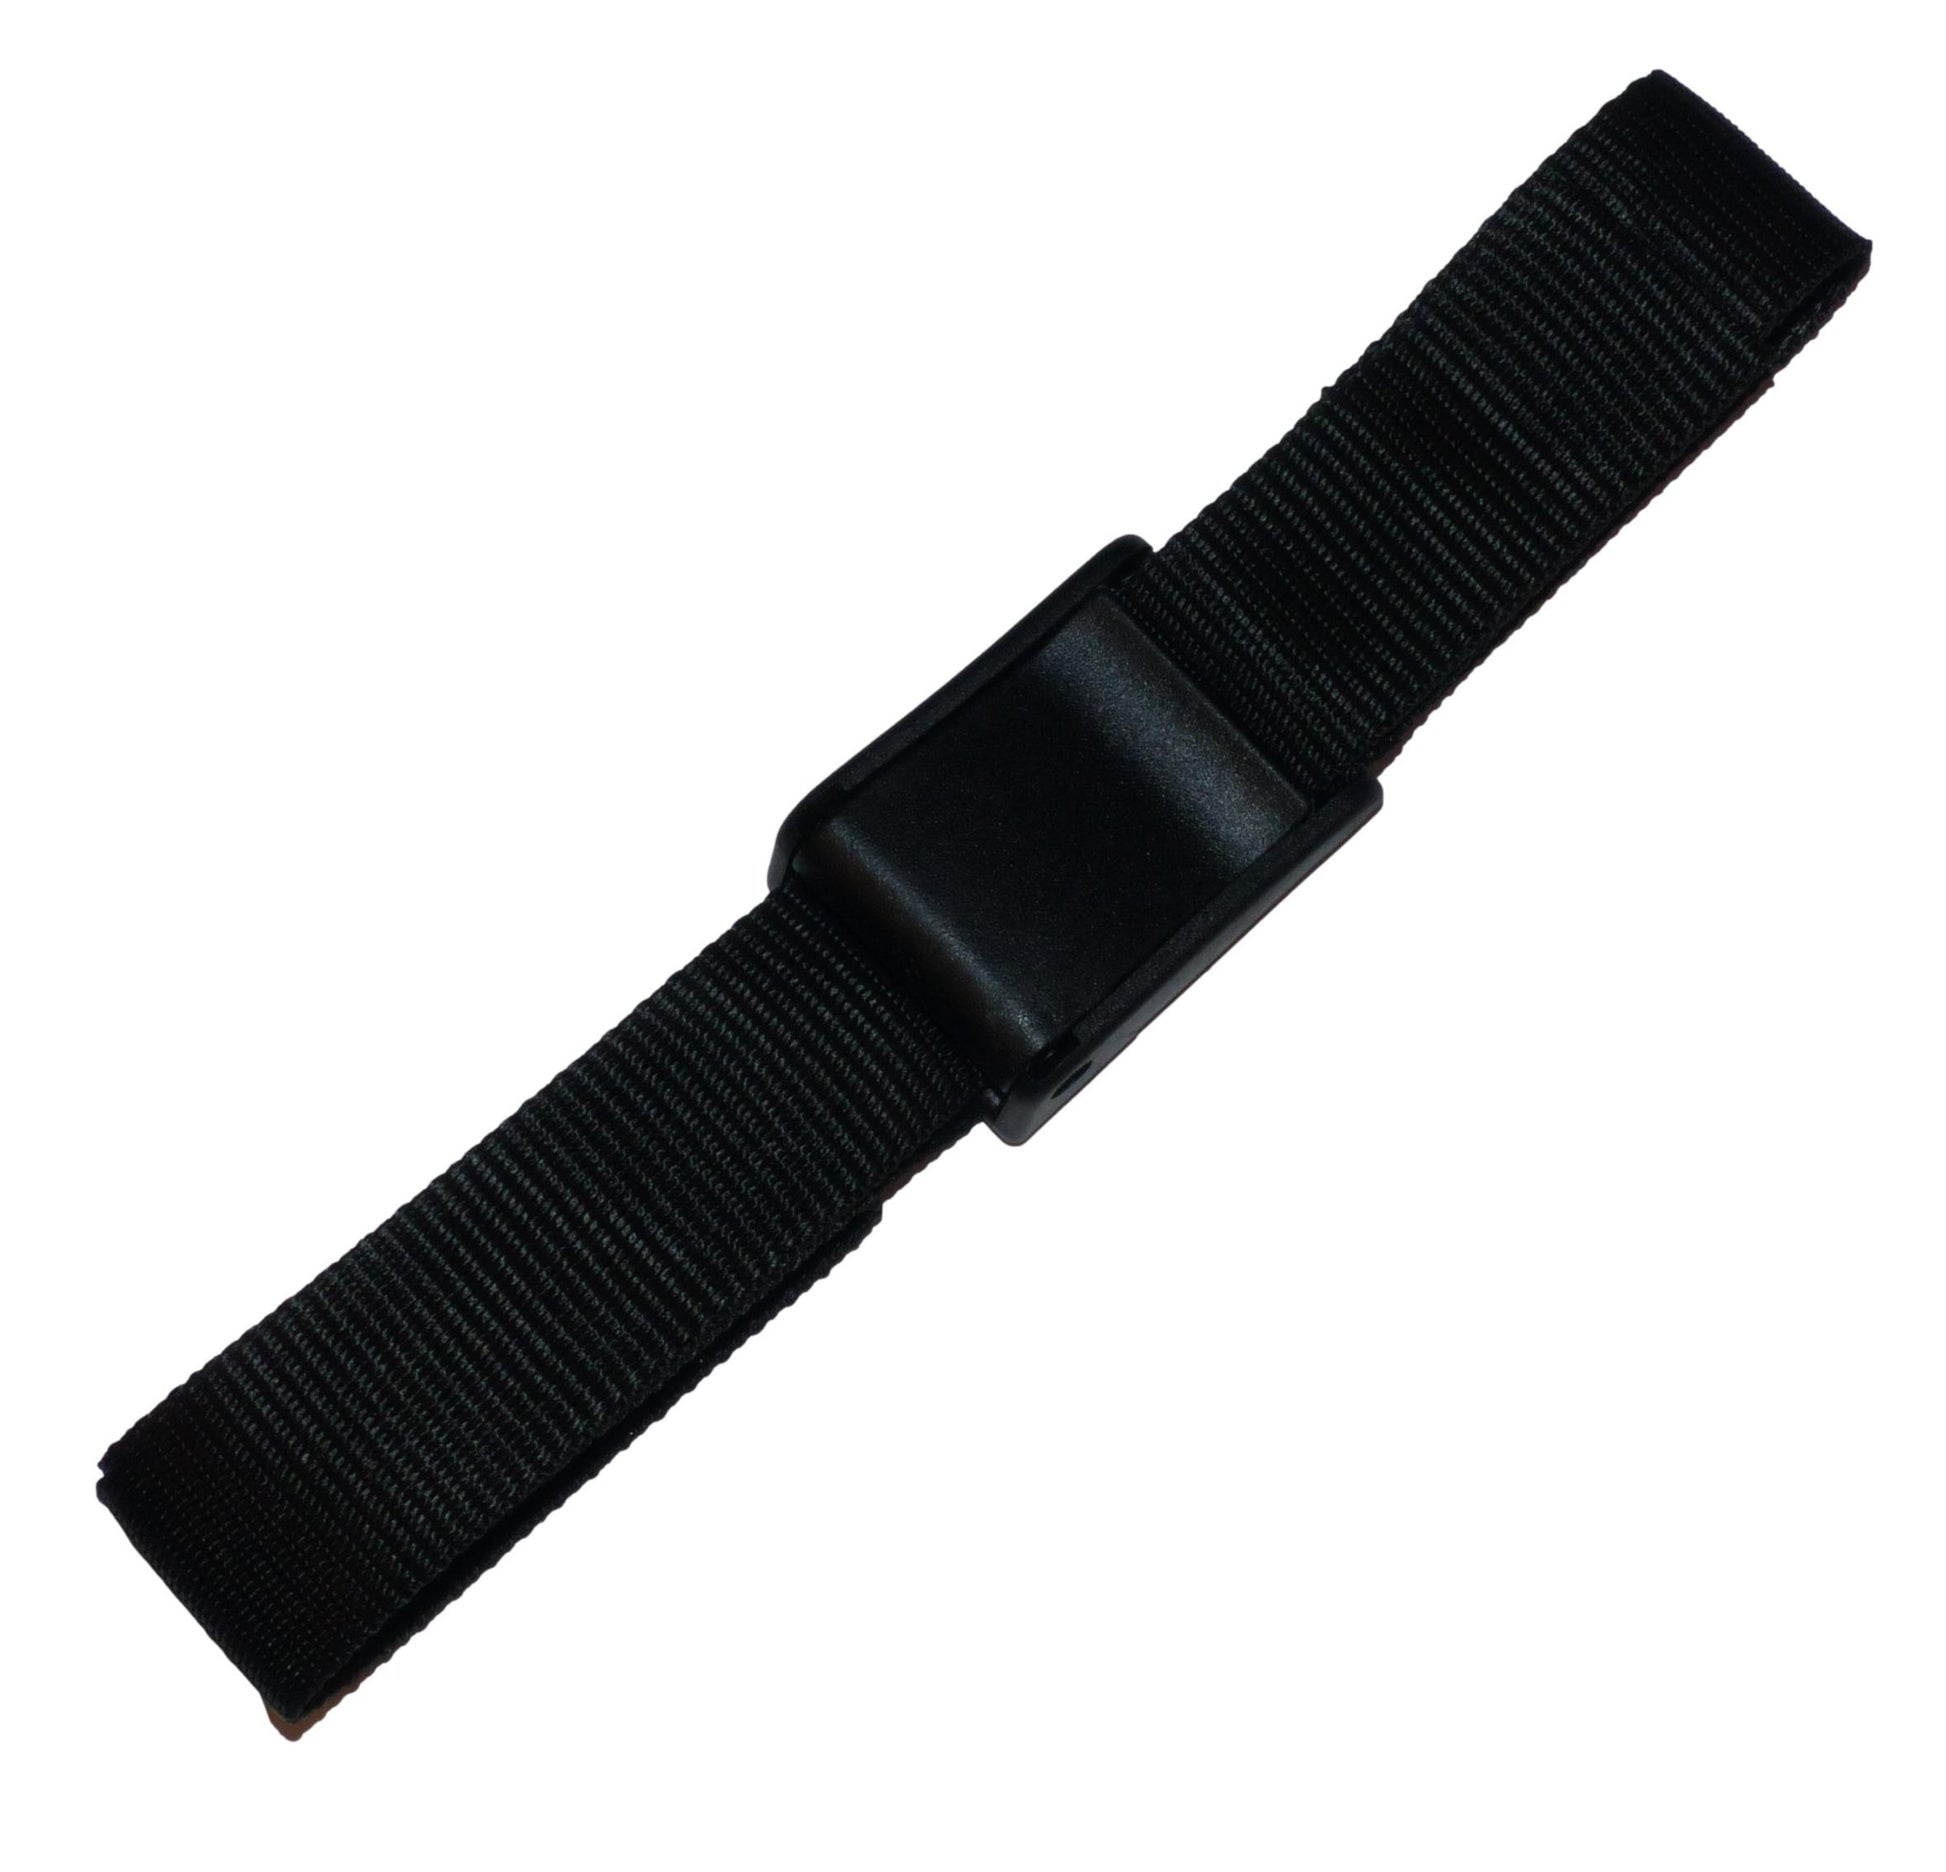 38mm Webbing Strap with Cam Buckle in black